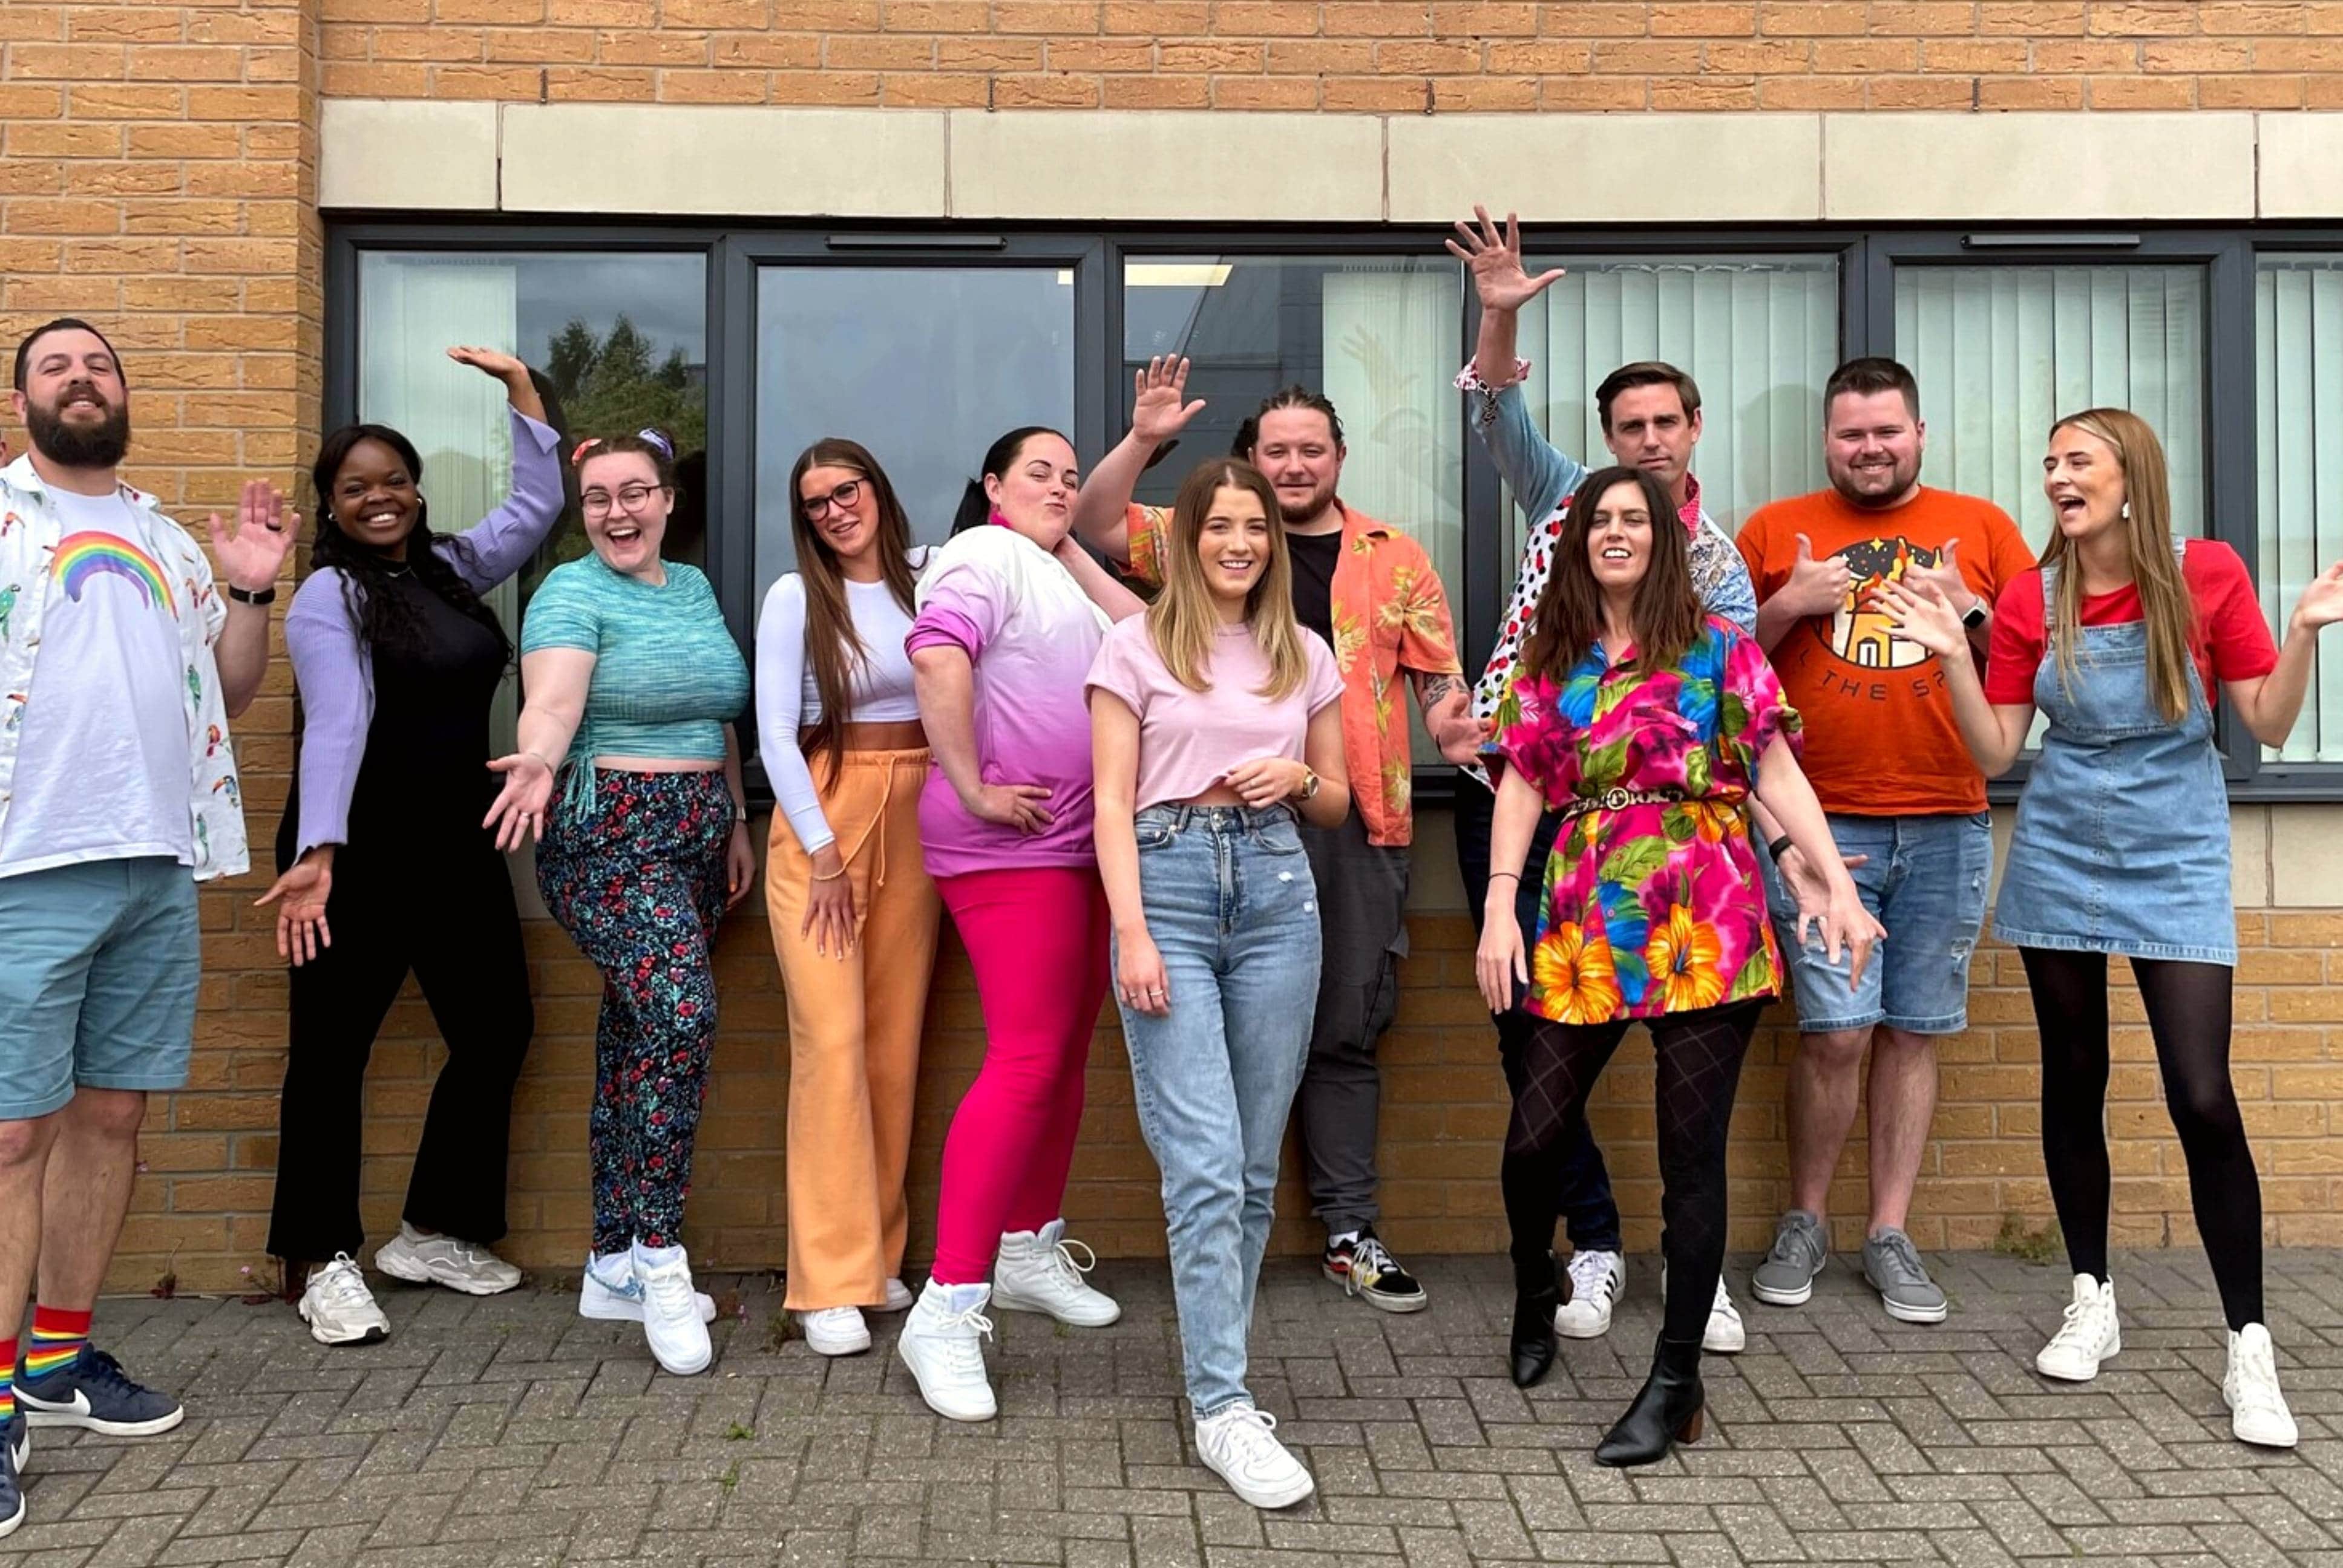 the JDR team posing gleefully, wearing an assortment of colourful clothing, celebrating pride month on the office's pride day